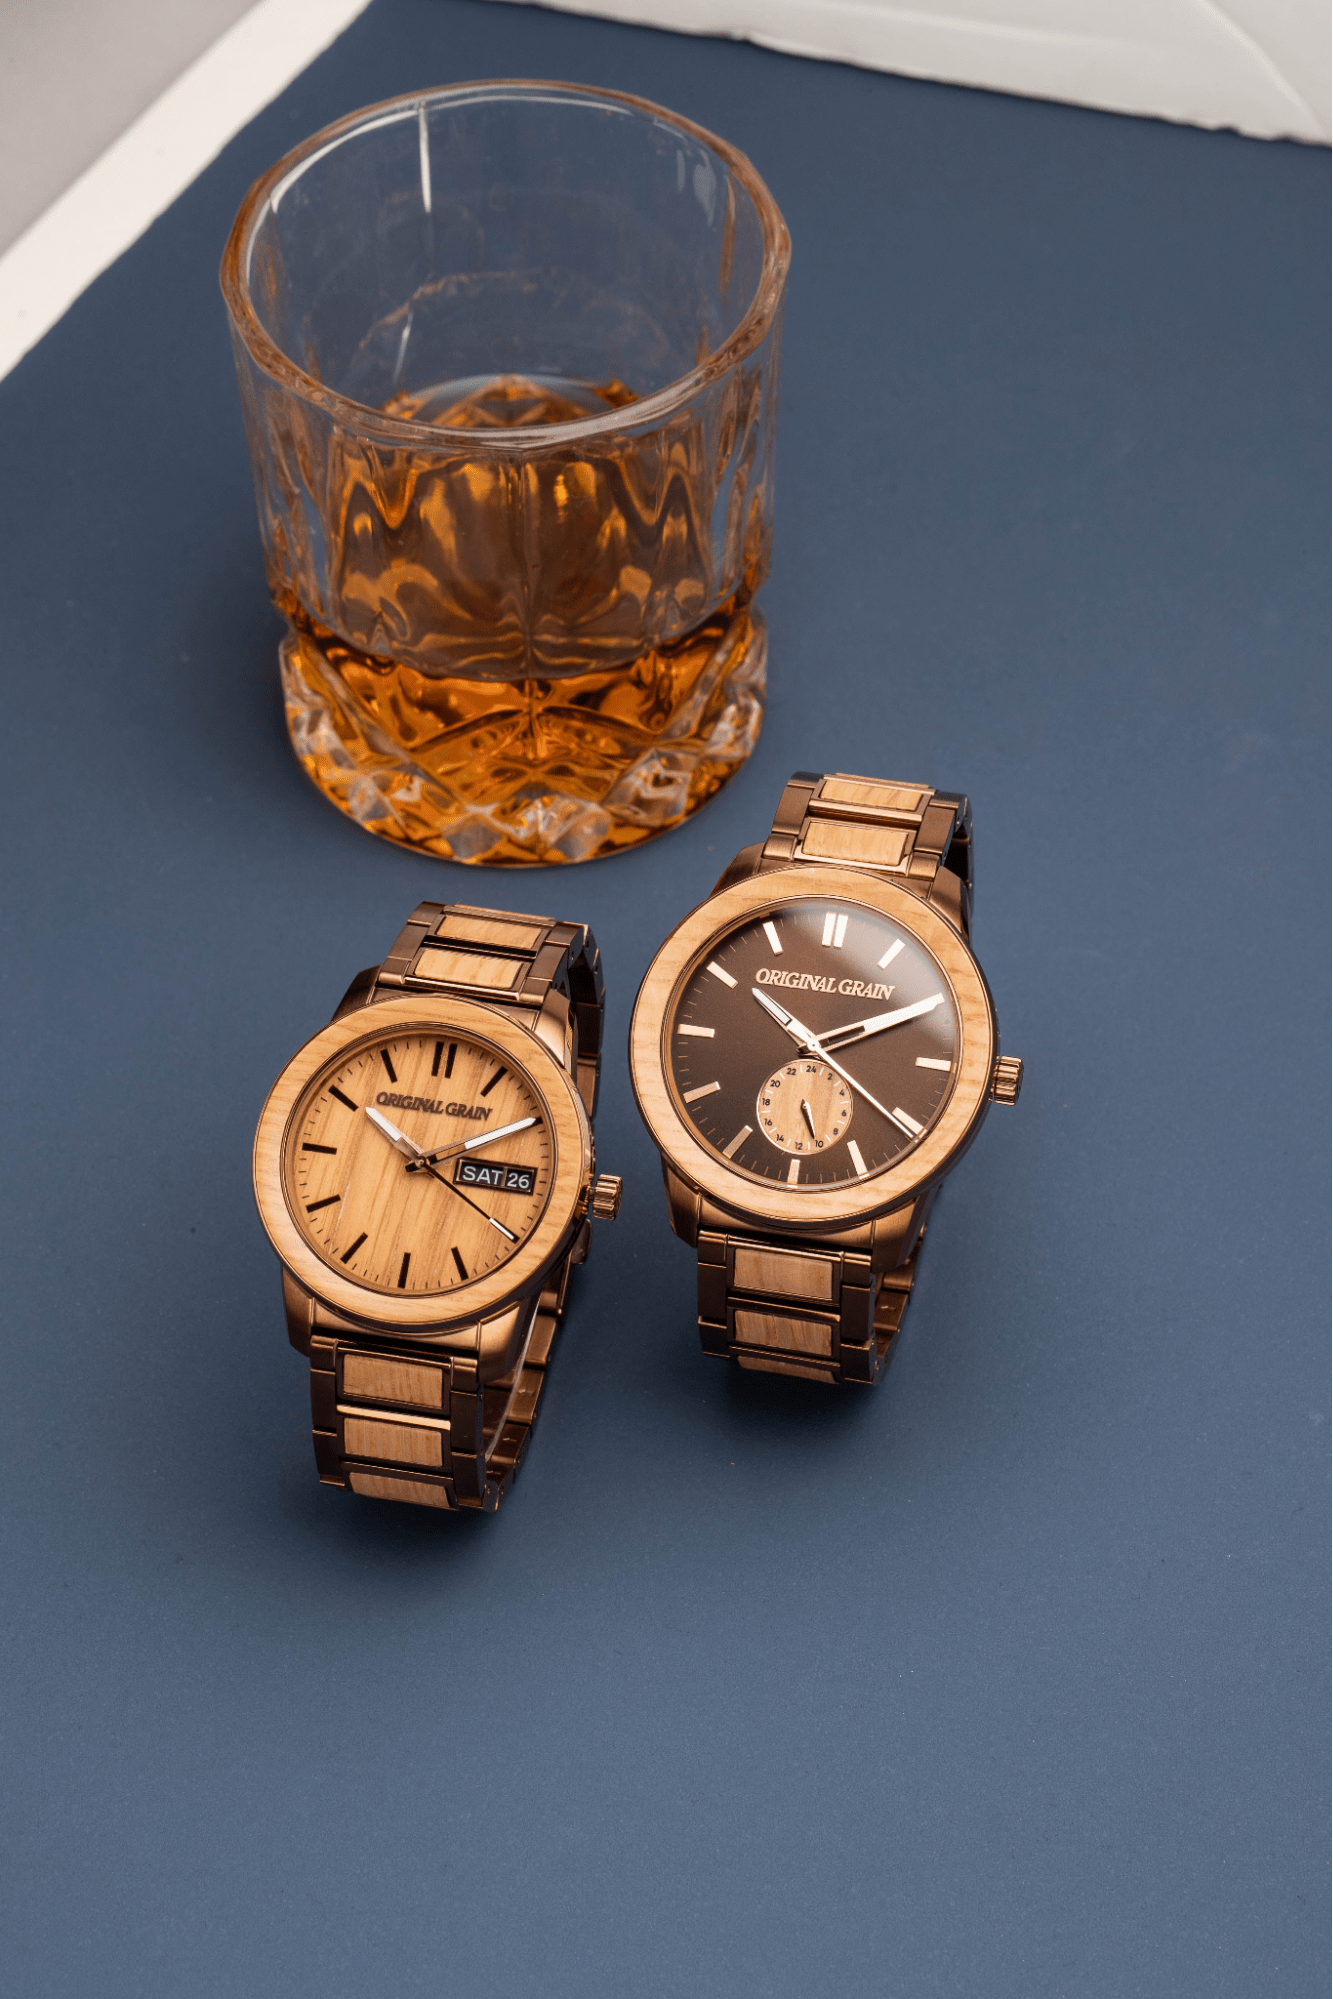 Image of two Original Grain watches next to a glass of Whiskey